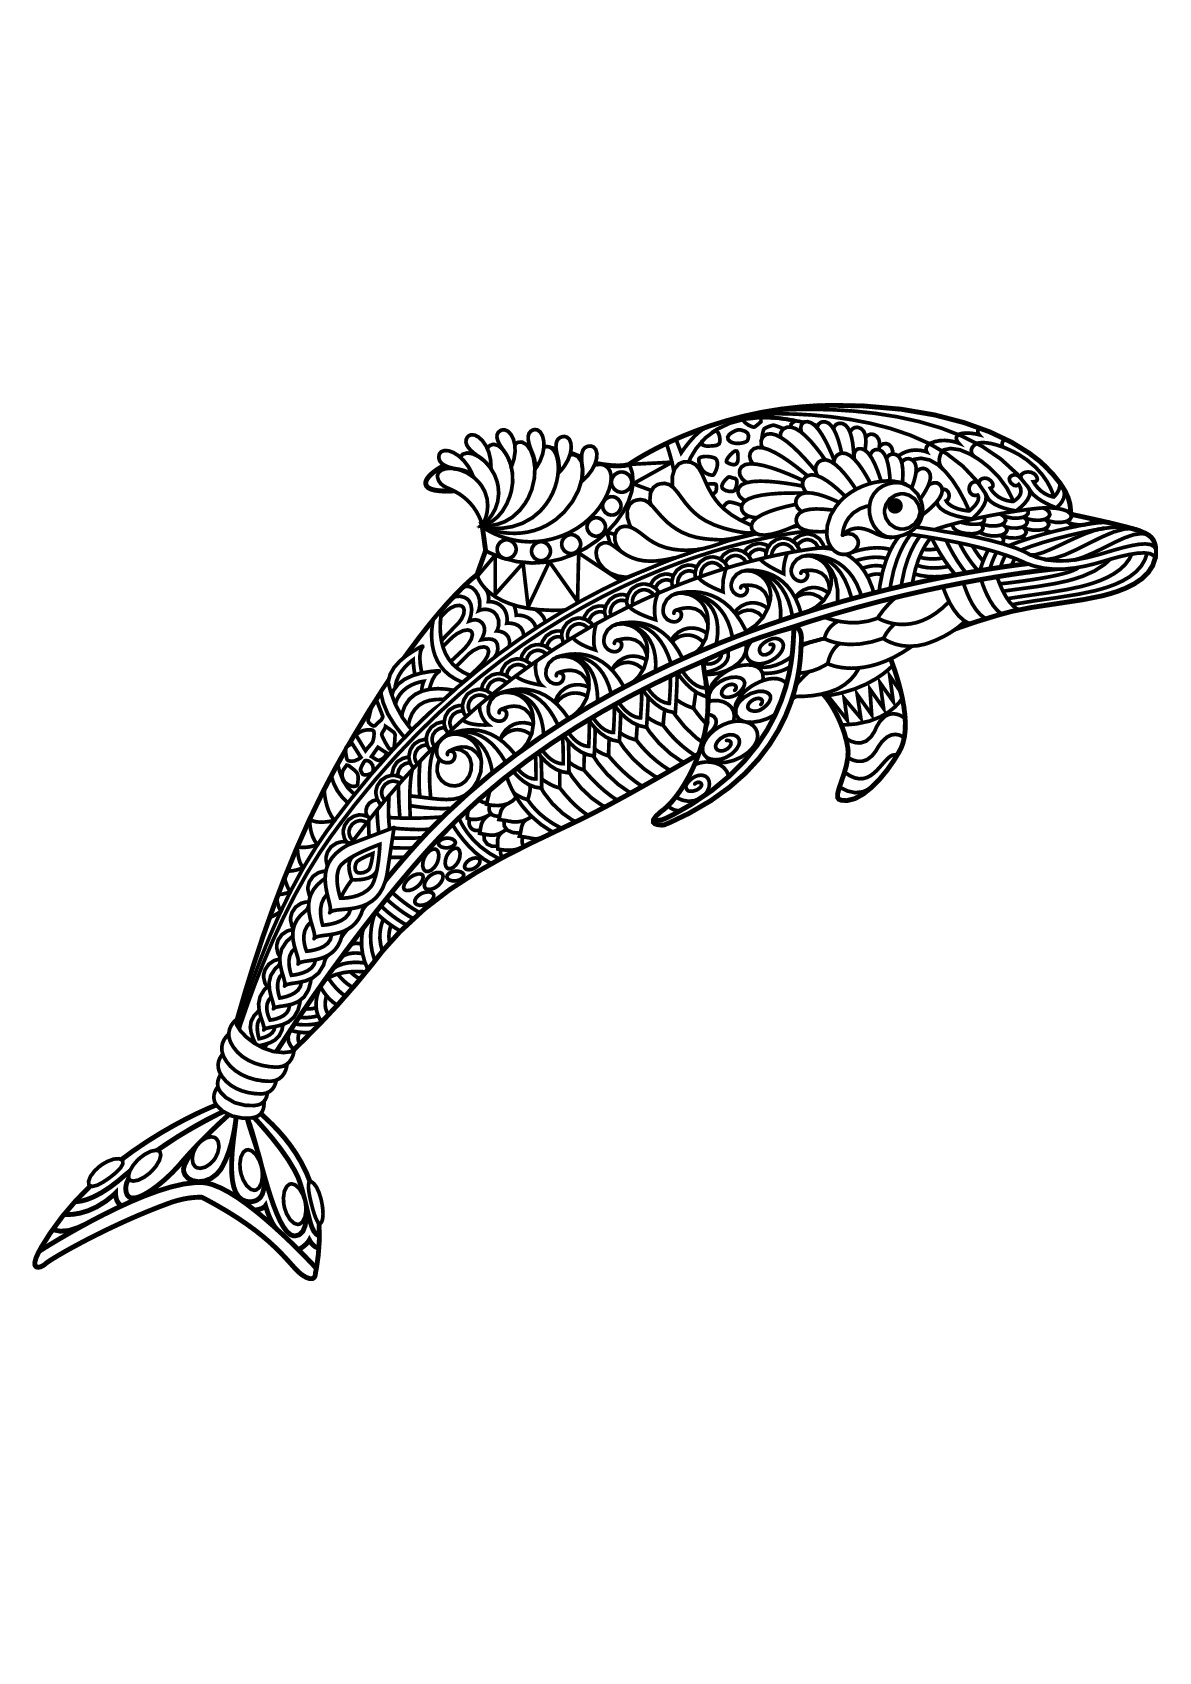 Beautiful Dolphins coloring page to print and color